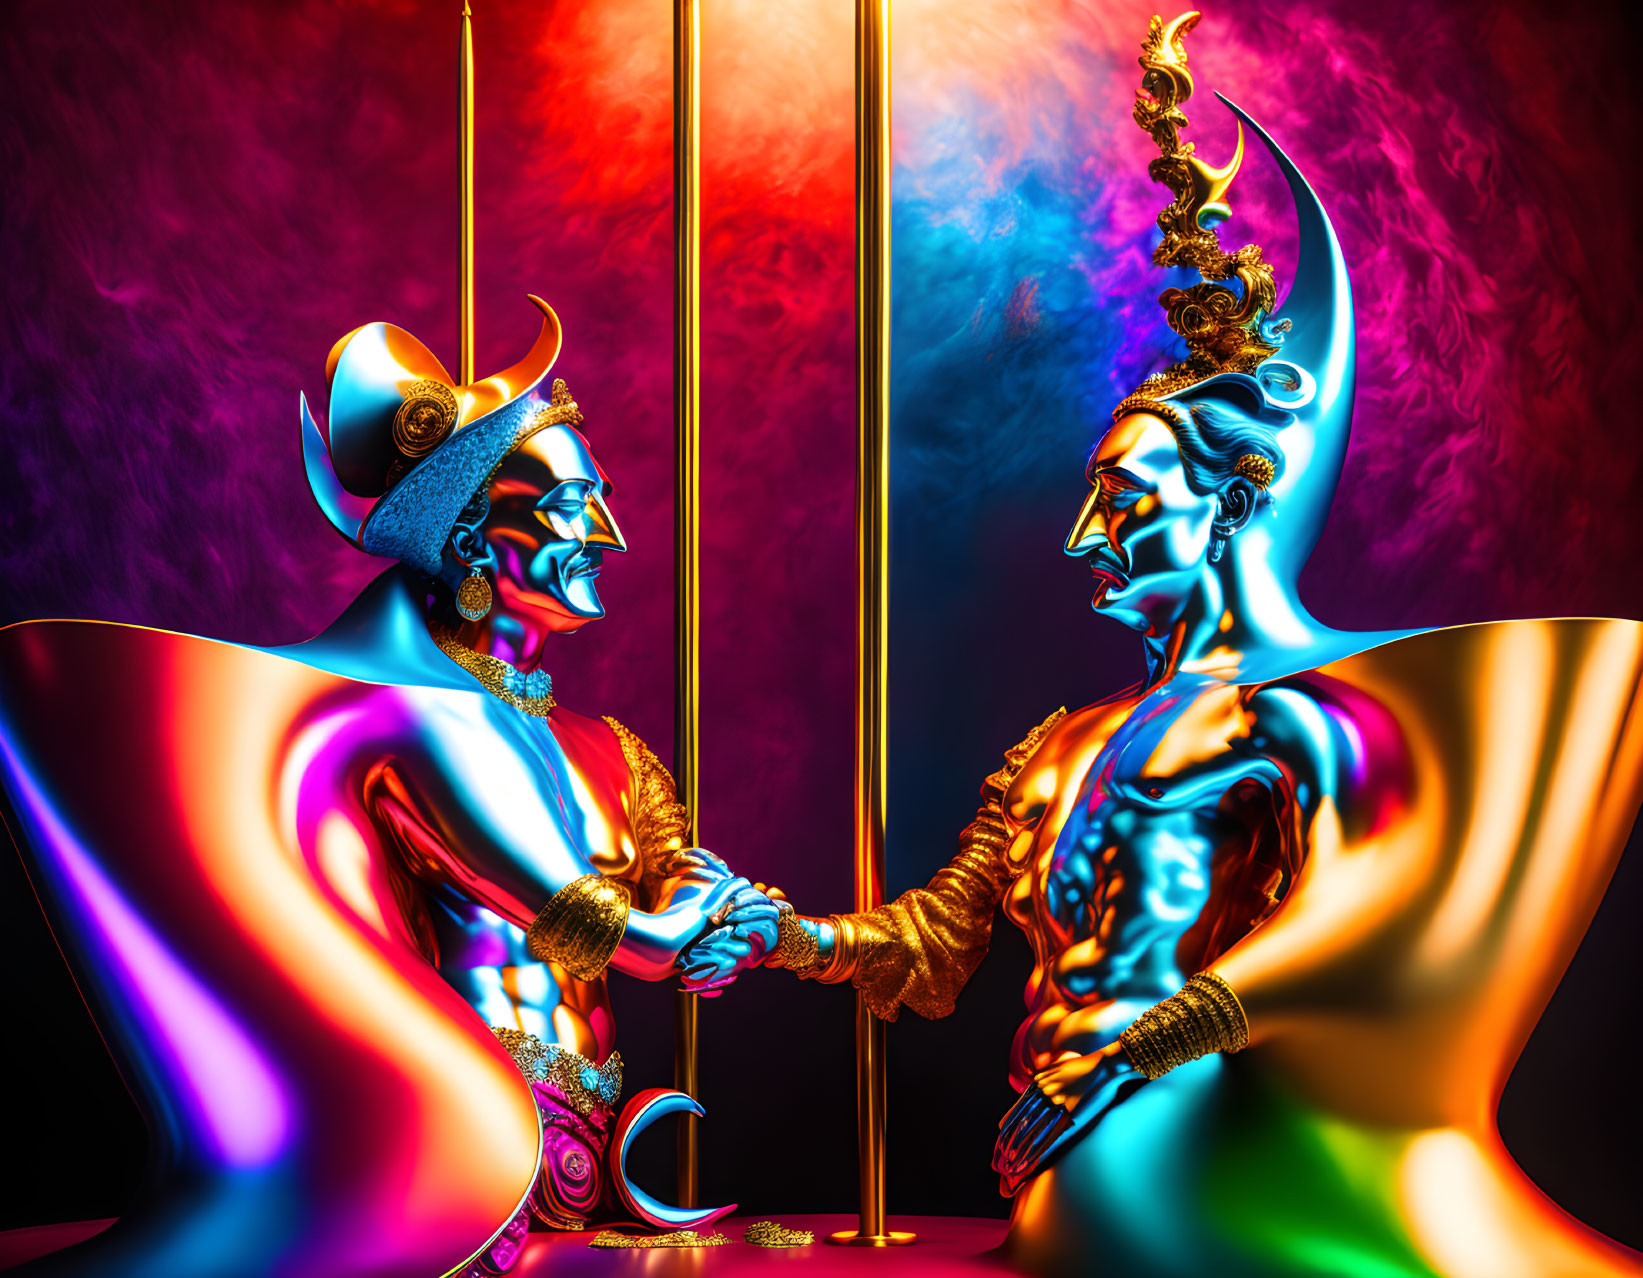 Colorful Artwork: Stylized Figures in Elaborate Costumes Shaking Hands